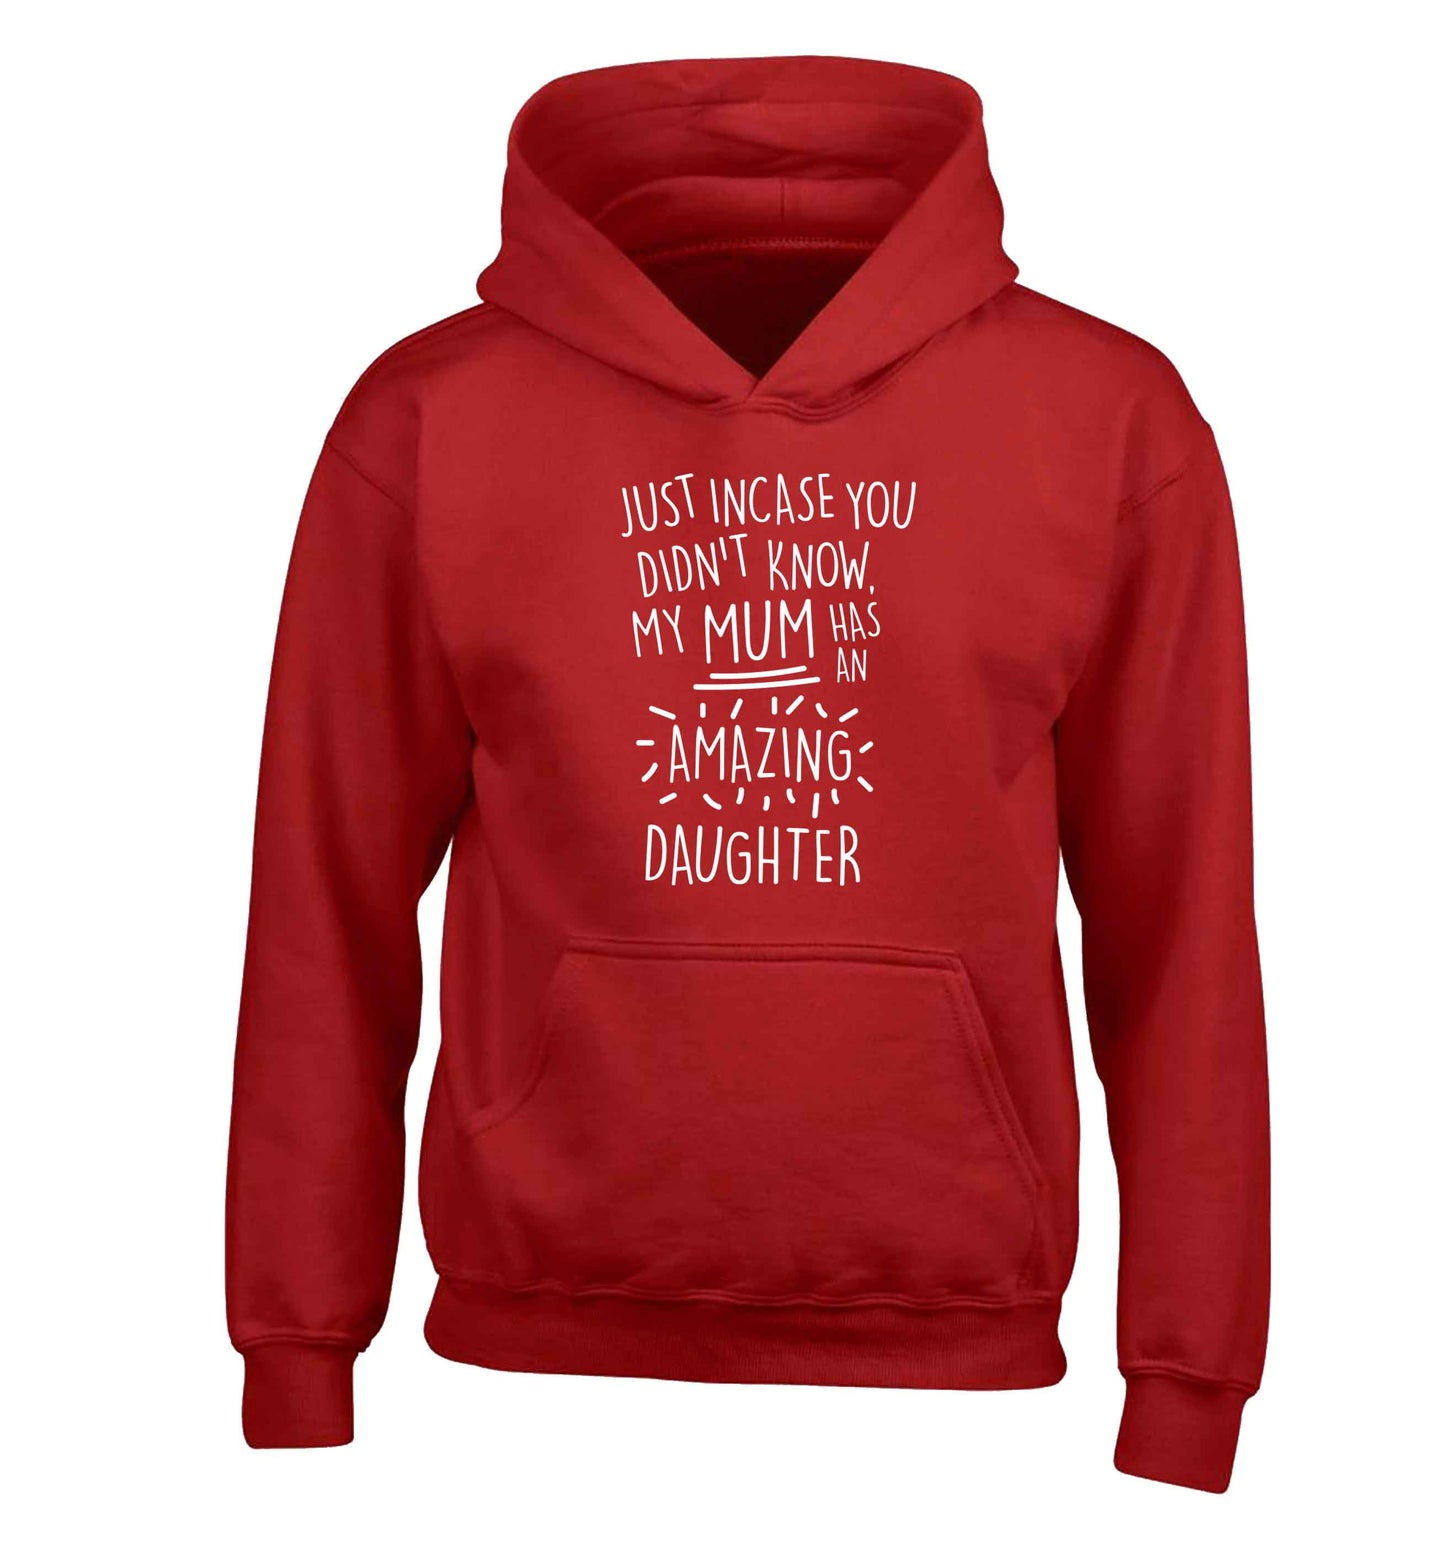 Just incase you didn't know my mum has an amazing daughter children's red hoodie 12-13 Years